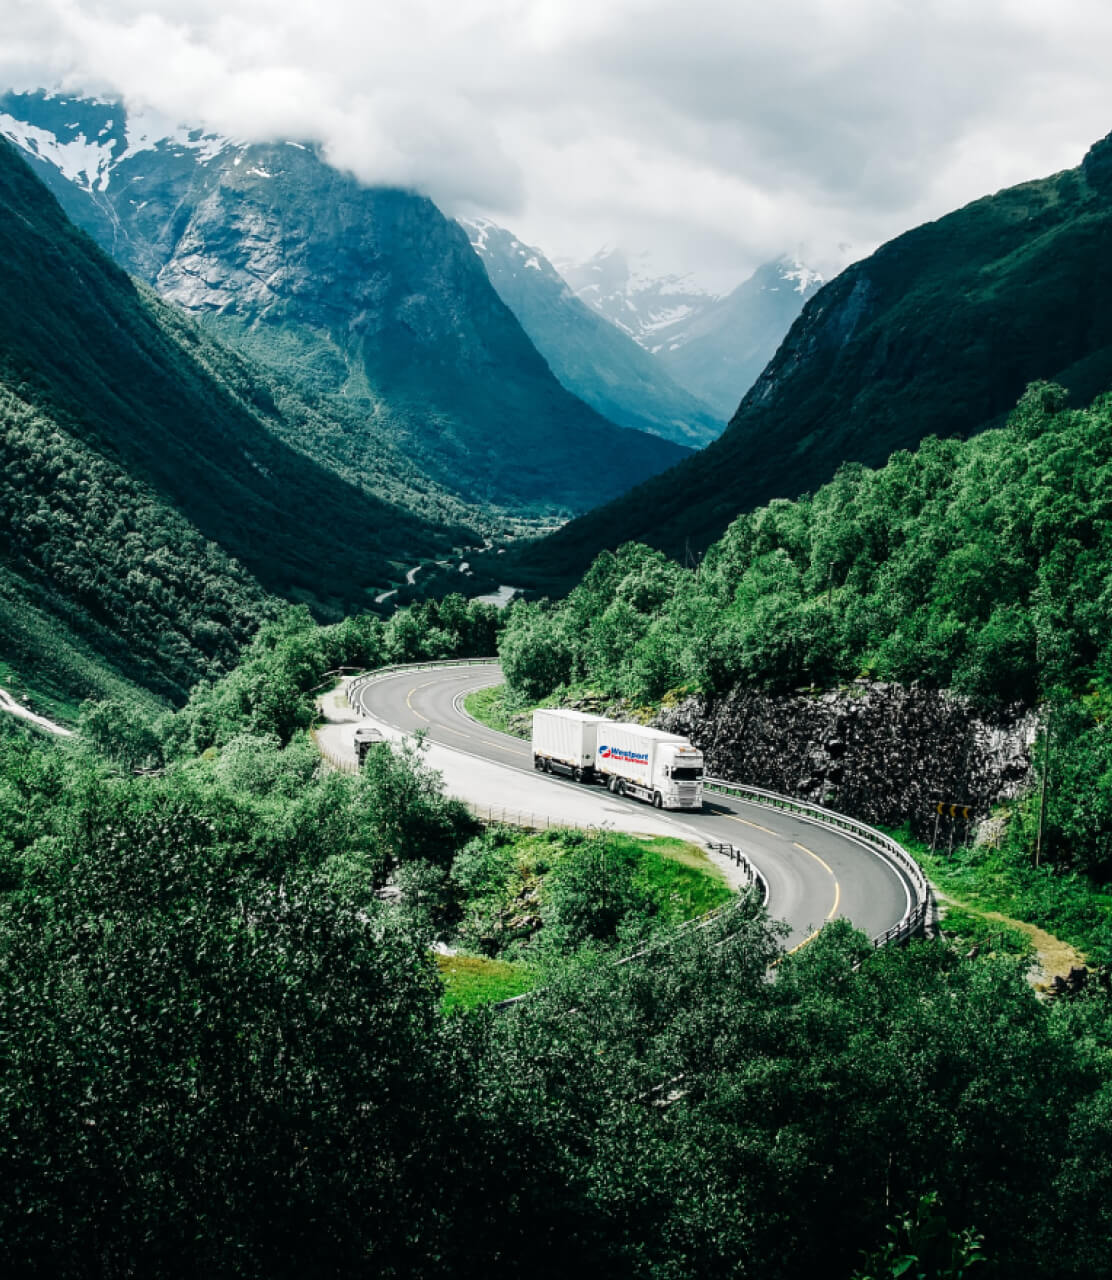 Truck driving down a road in mountains